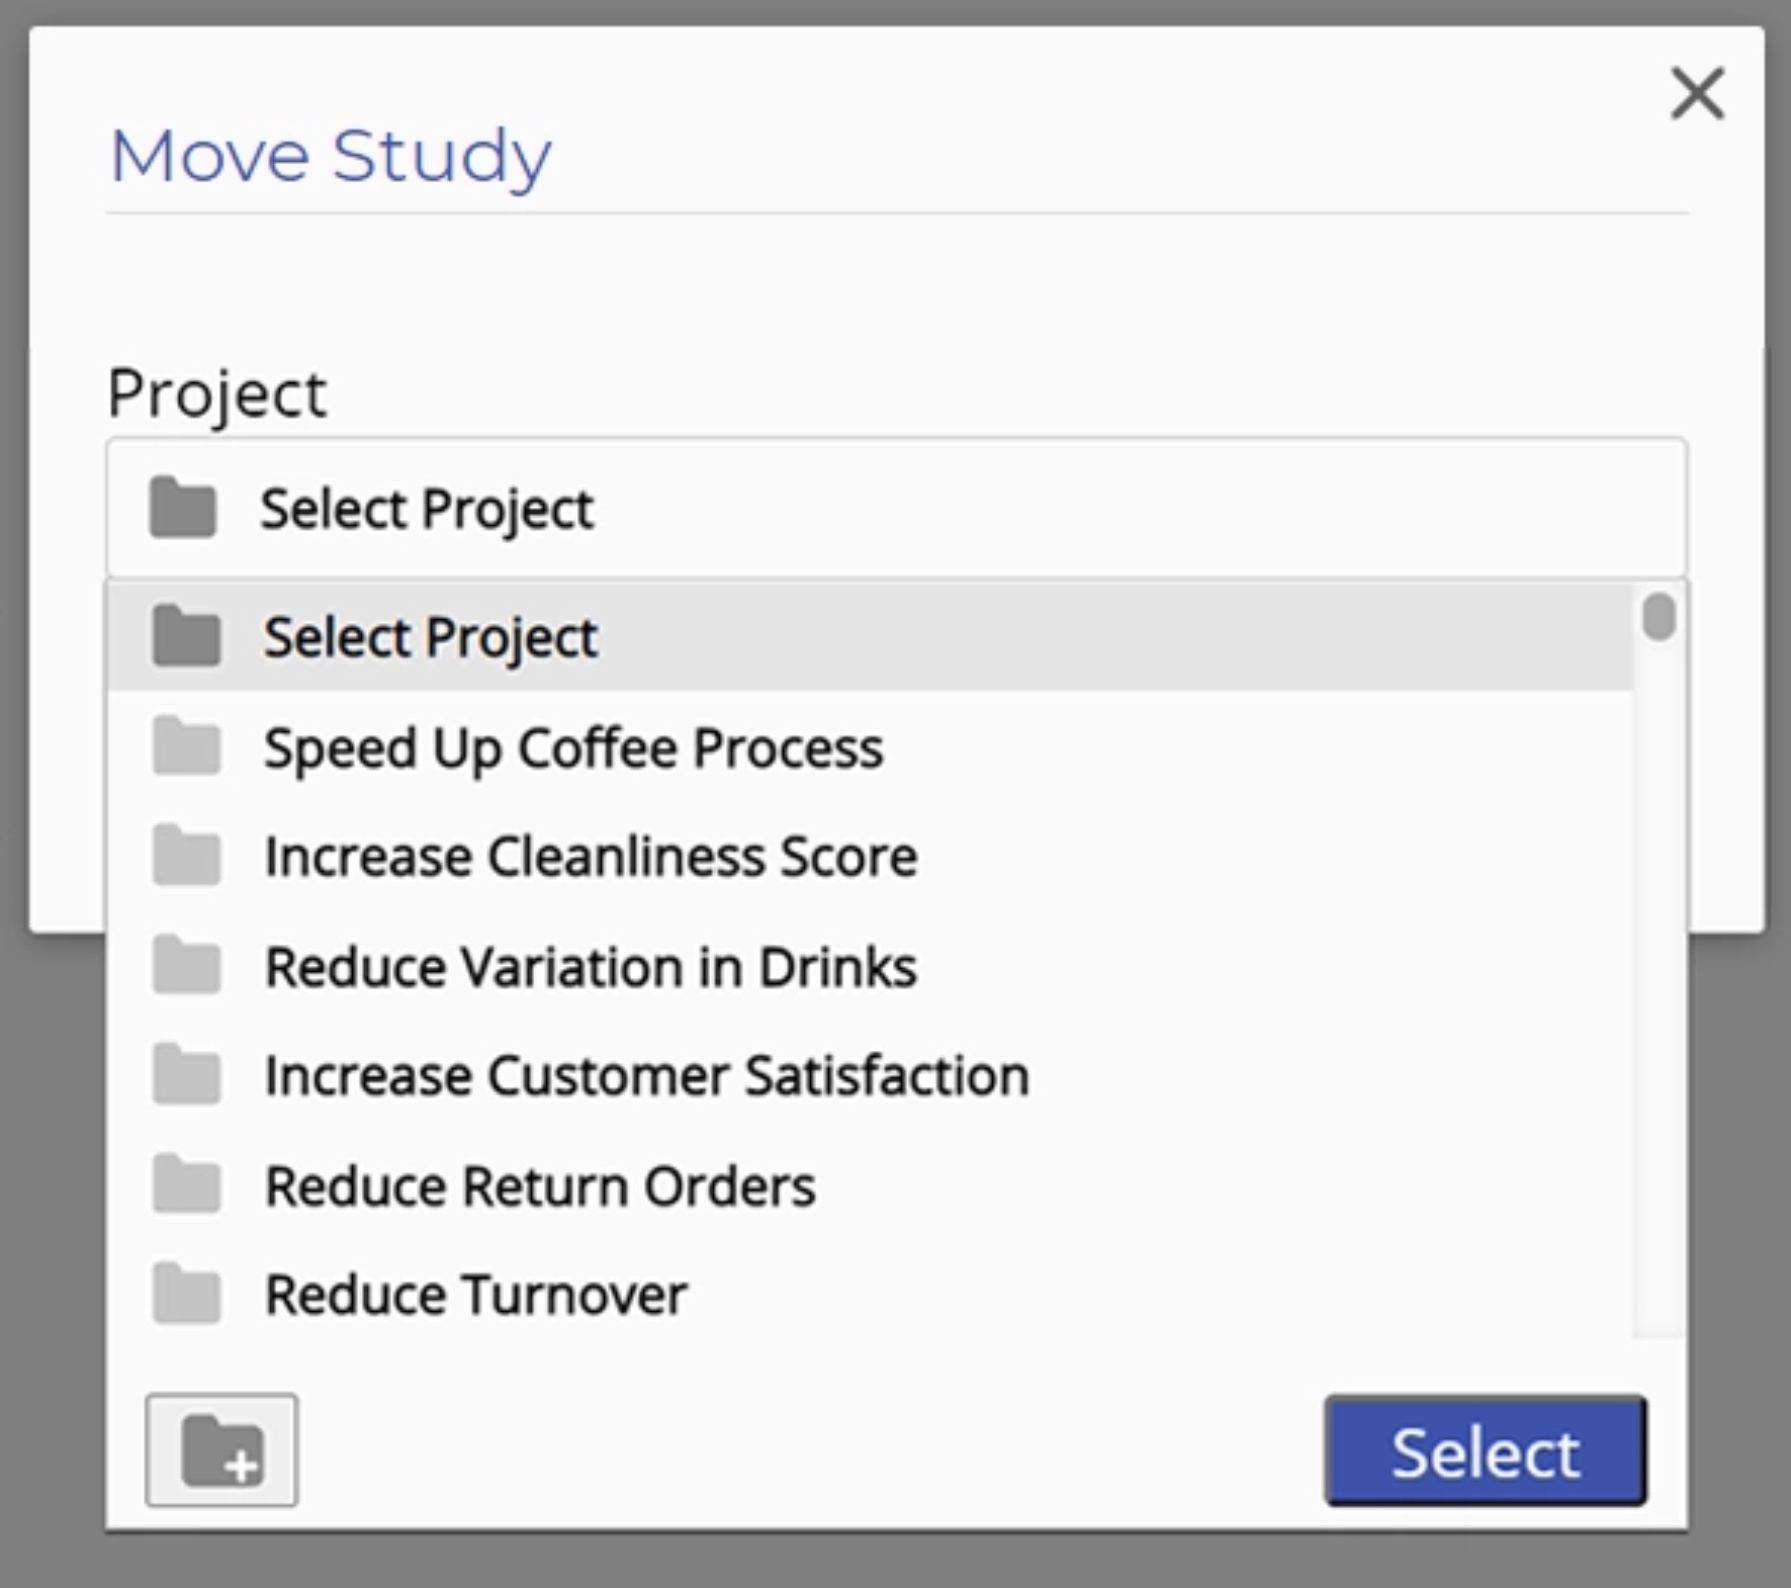 Select project to move from dropdown.